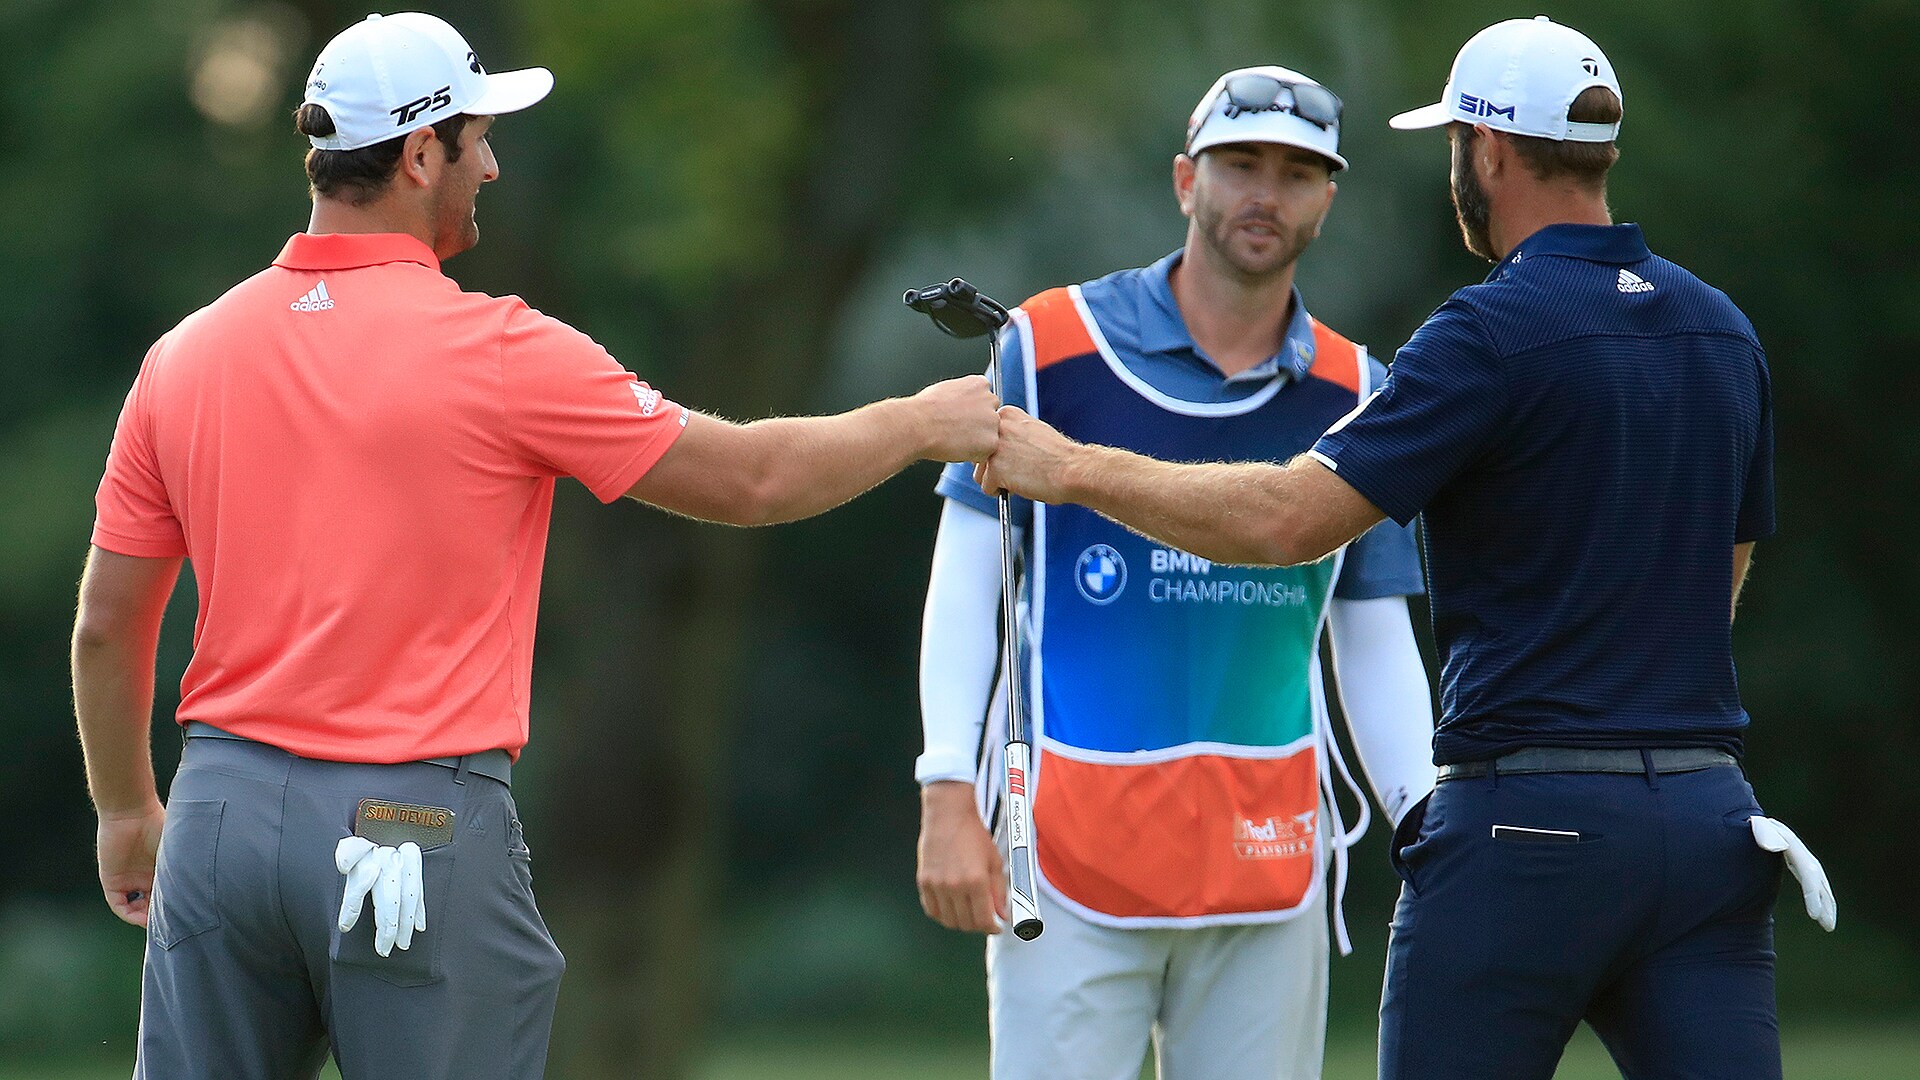 No. 2 defeats No. 1, but Dustin Johnson remains ahead of Jon Rahm in OWGR